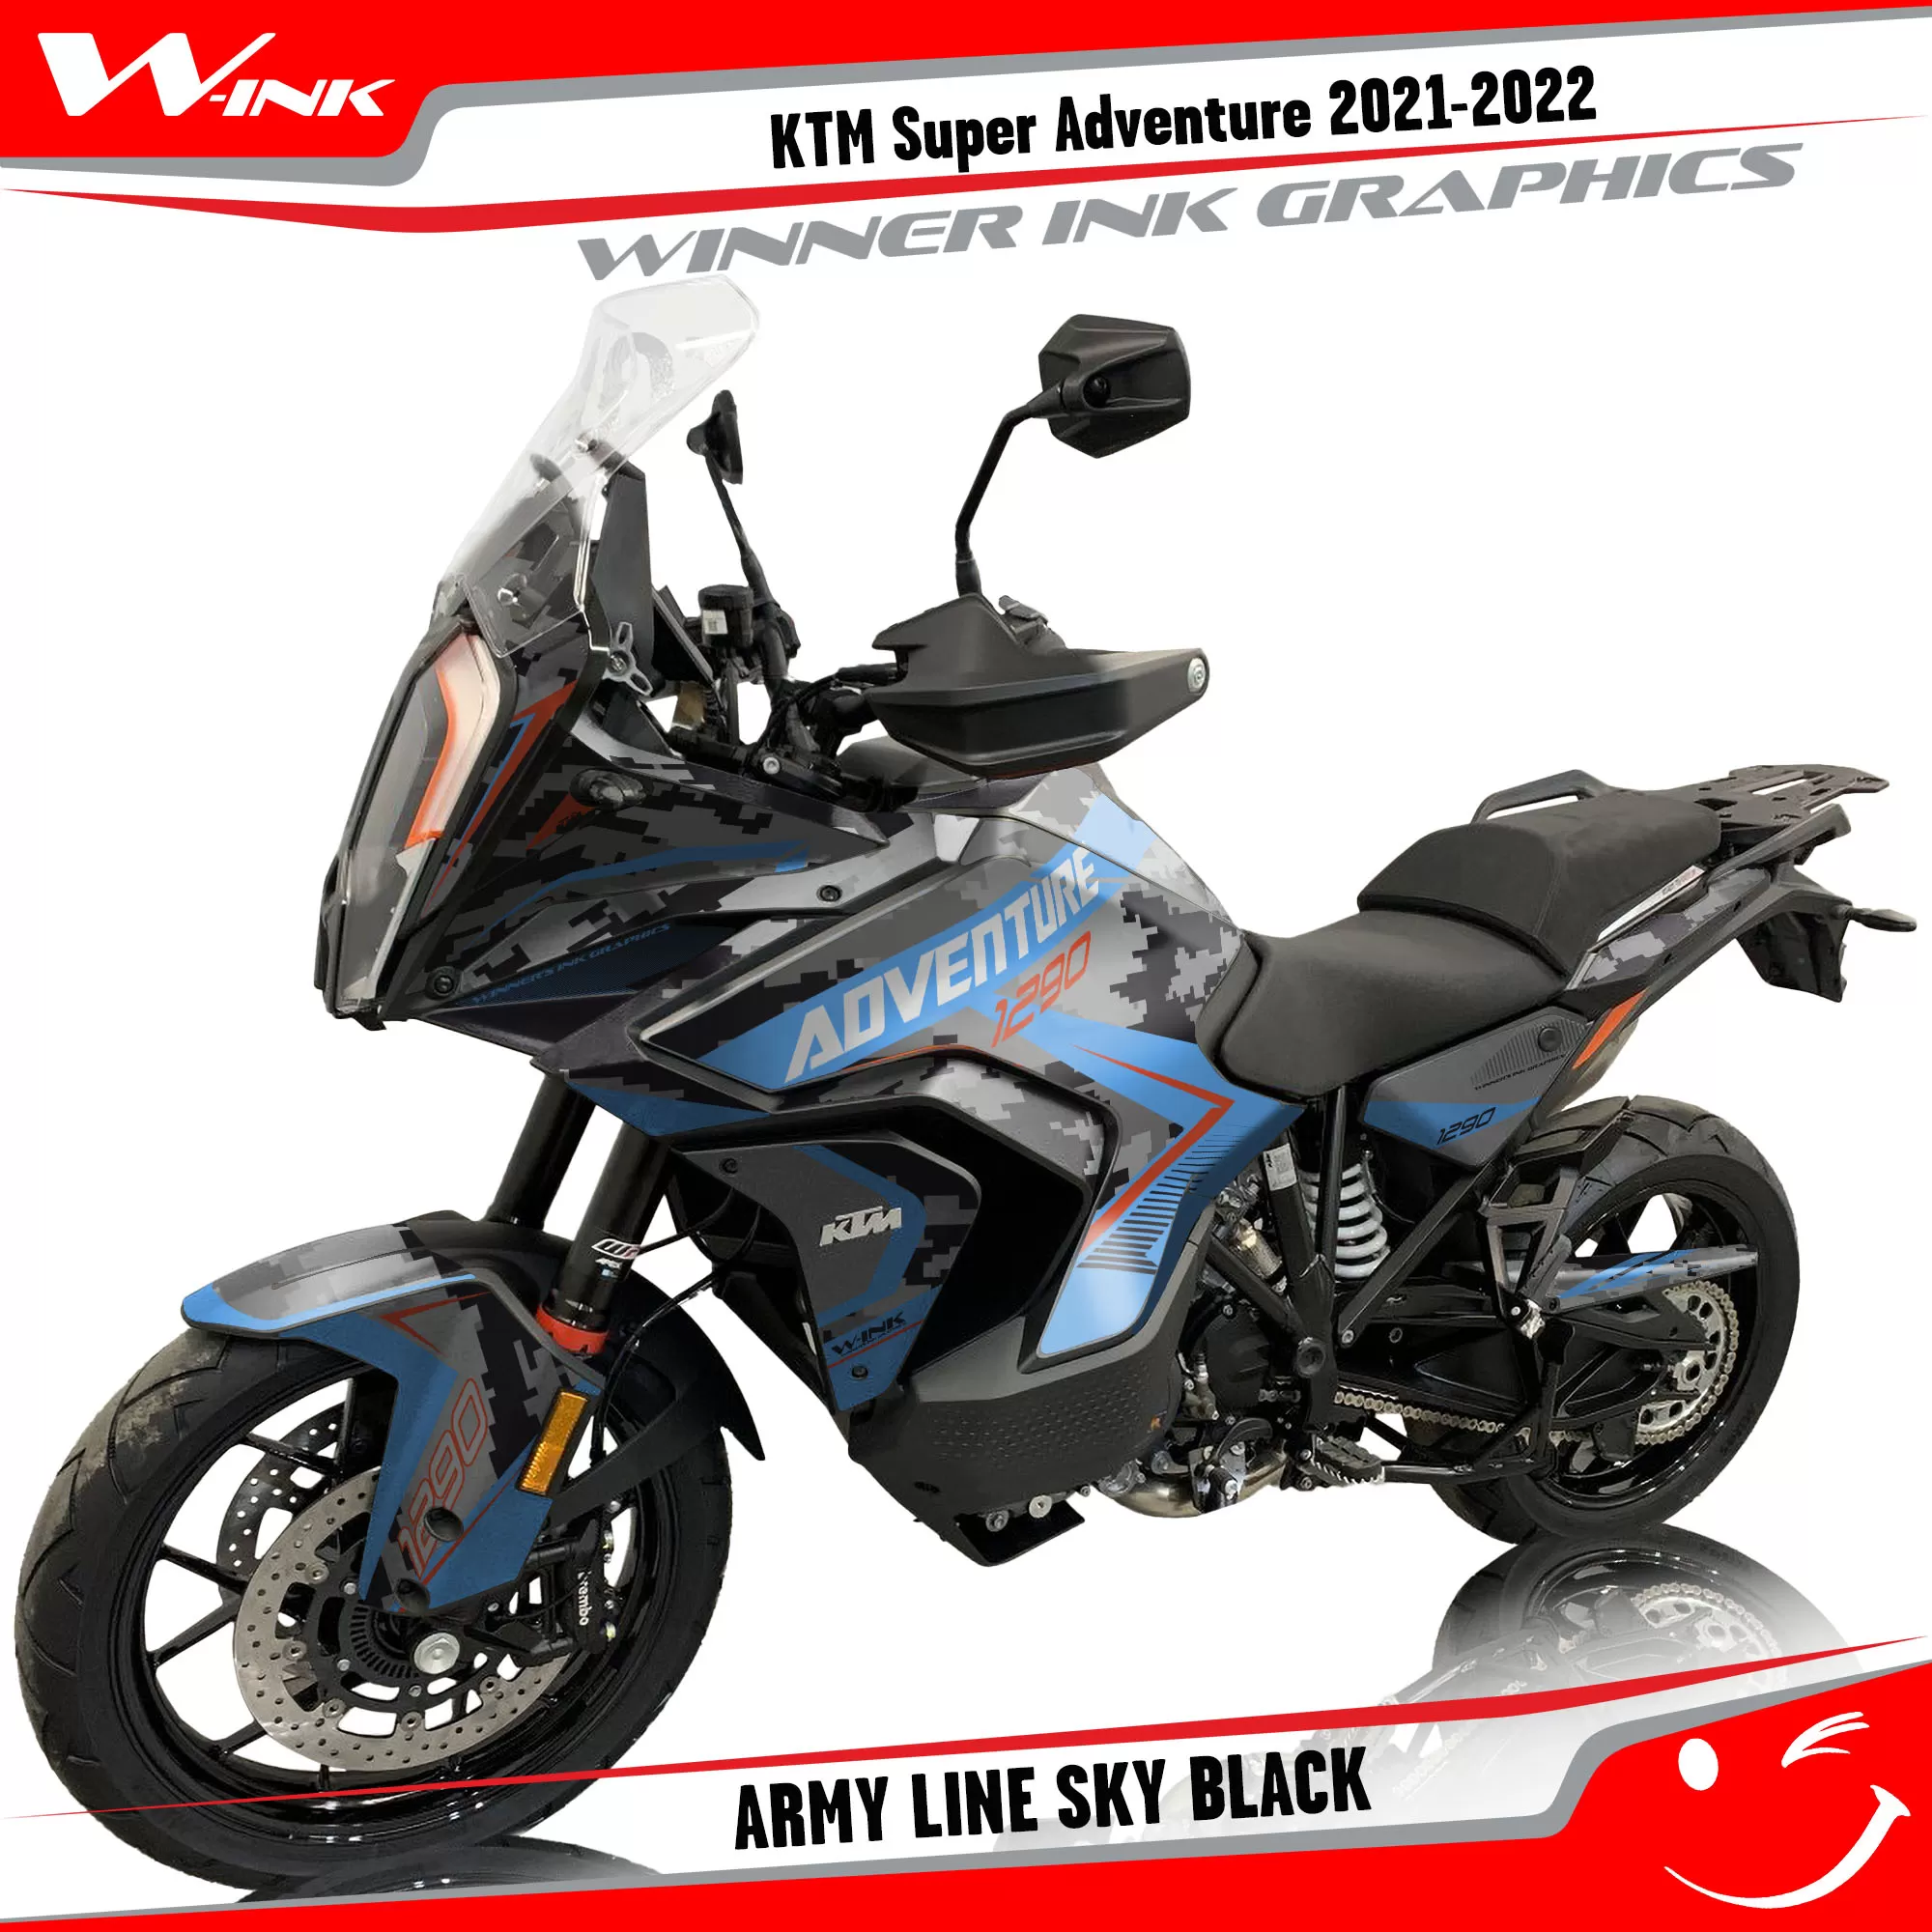 KTM-Super-Adventure-S-2021-2022-graphics-kit-and-decals-with-designs-Army-Line-Sky-Black